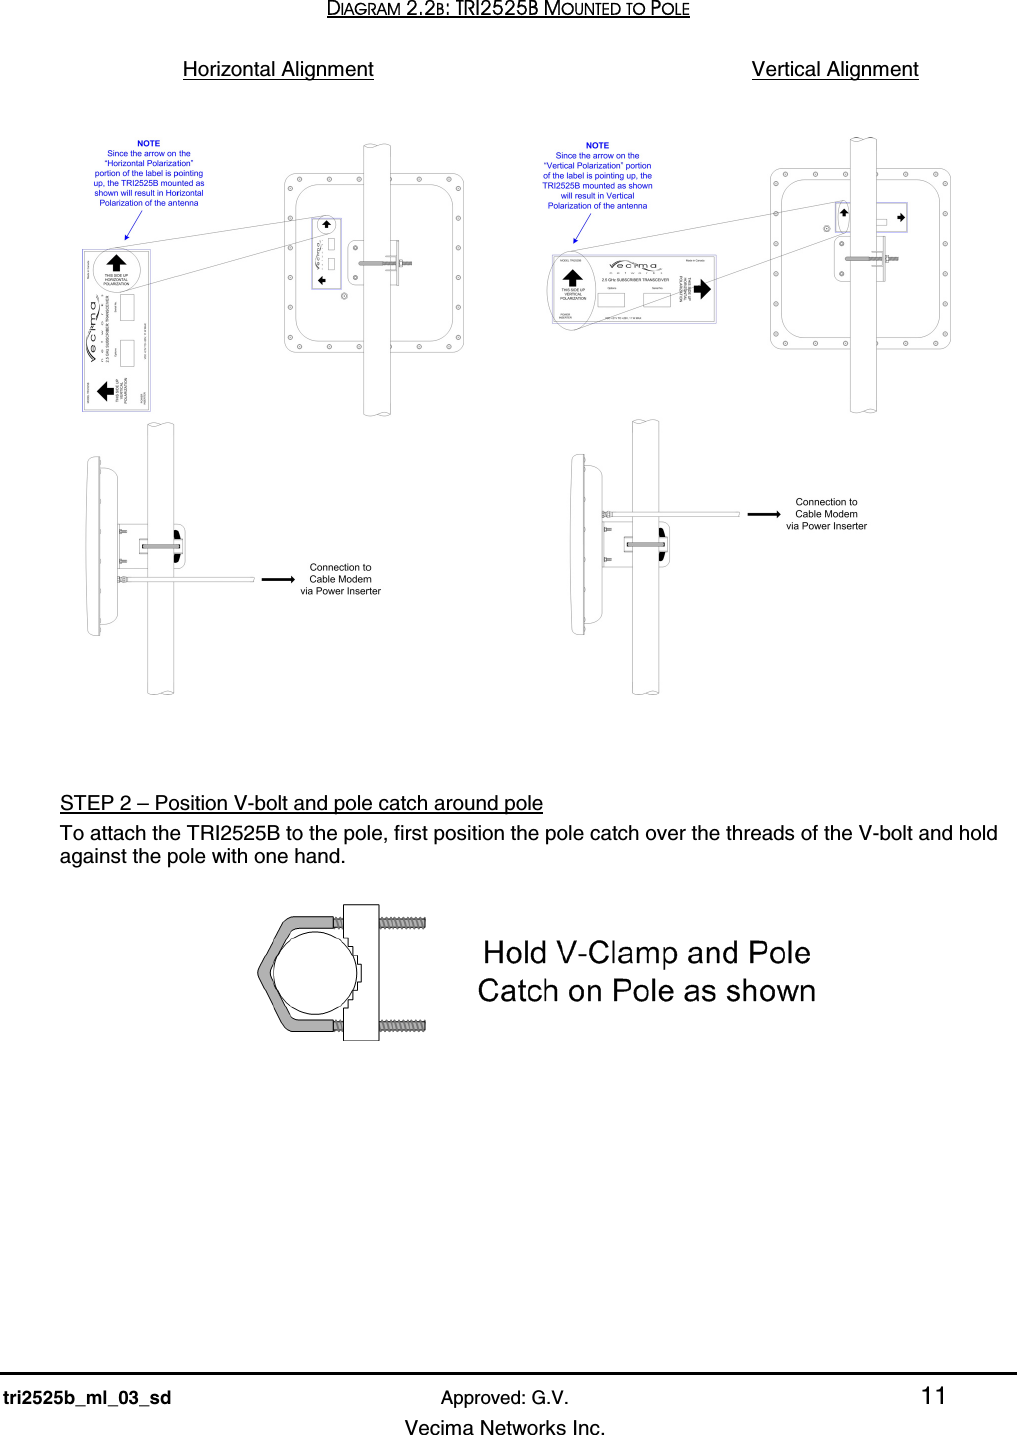    tri2525b_ml_03_sd Approved: G.V. 11   Vecima Networks Inc. DIAGRAM 2.2B: TRI2525B MOUNTED TO POLE  Horizontal Alignment             Vertical Alignment             STEP 2 – Position V-bolt and pole catch around pole To attach the TRI2525B to the pole, first position the pole catch over the threads of the V-bolt and hold against the pole with one hand.            